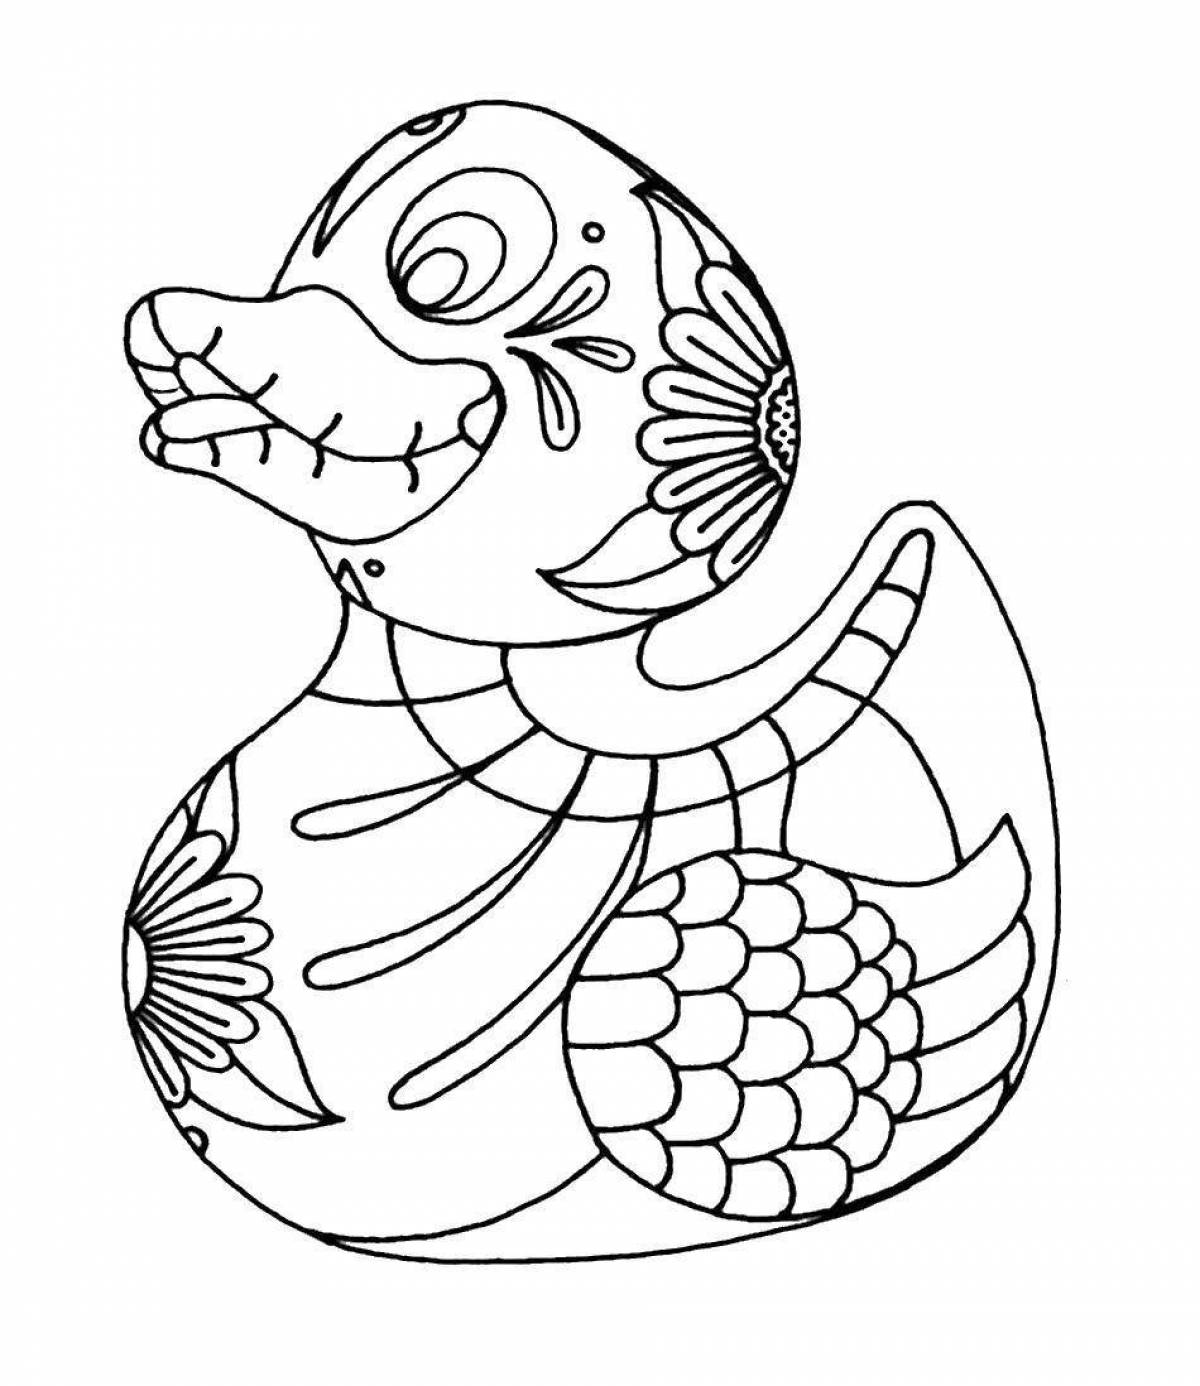 Impressive lalafan duck coloring page for babies